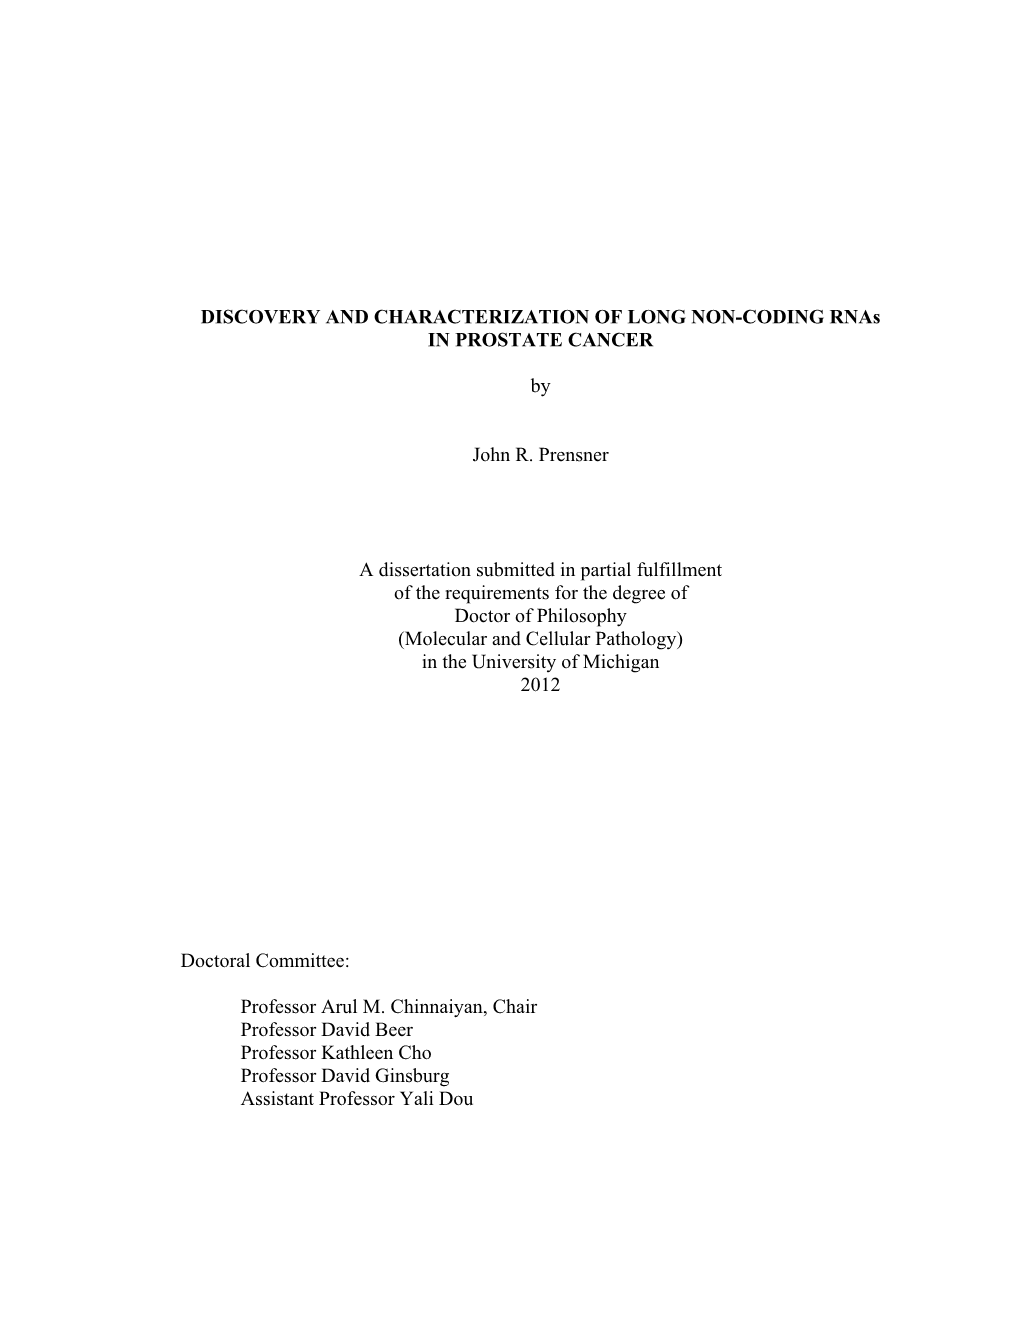 DISCOVERY and CHARACTERIZATION of LONG NON-CODING Rnas in PROSTATE CANCER by John R. Prensner a Dissertation Submitted in Parti